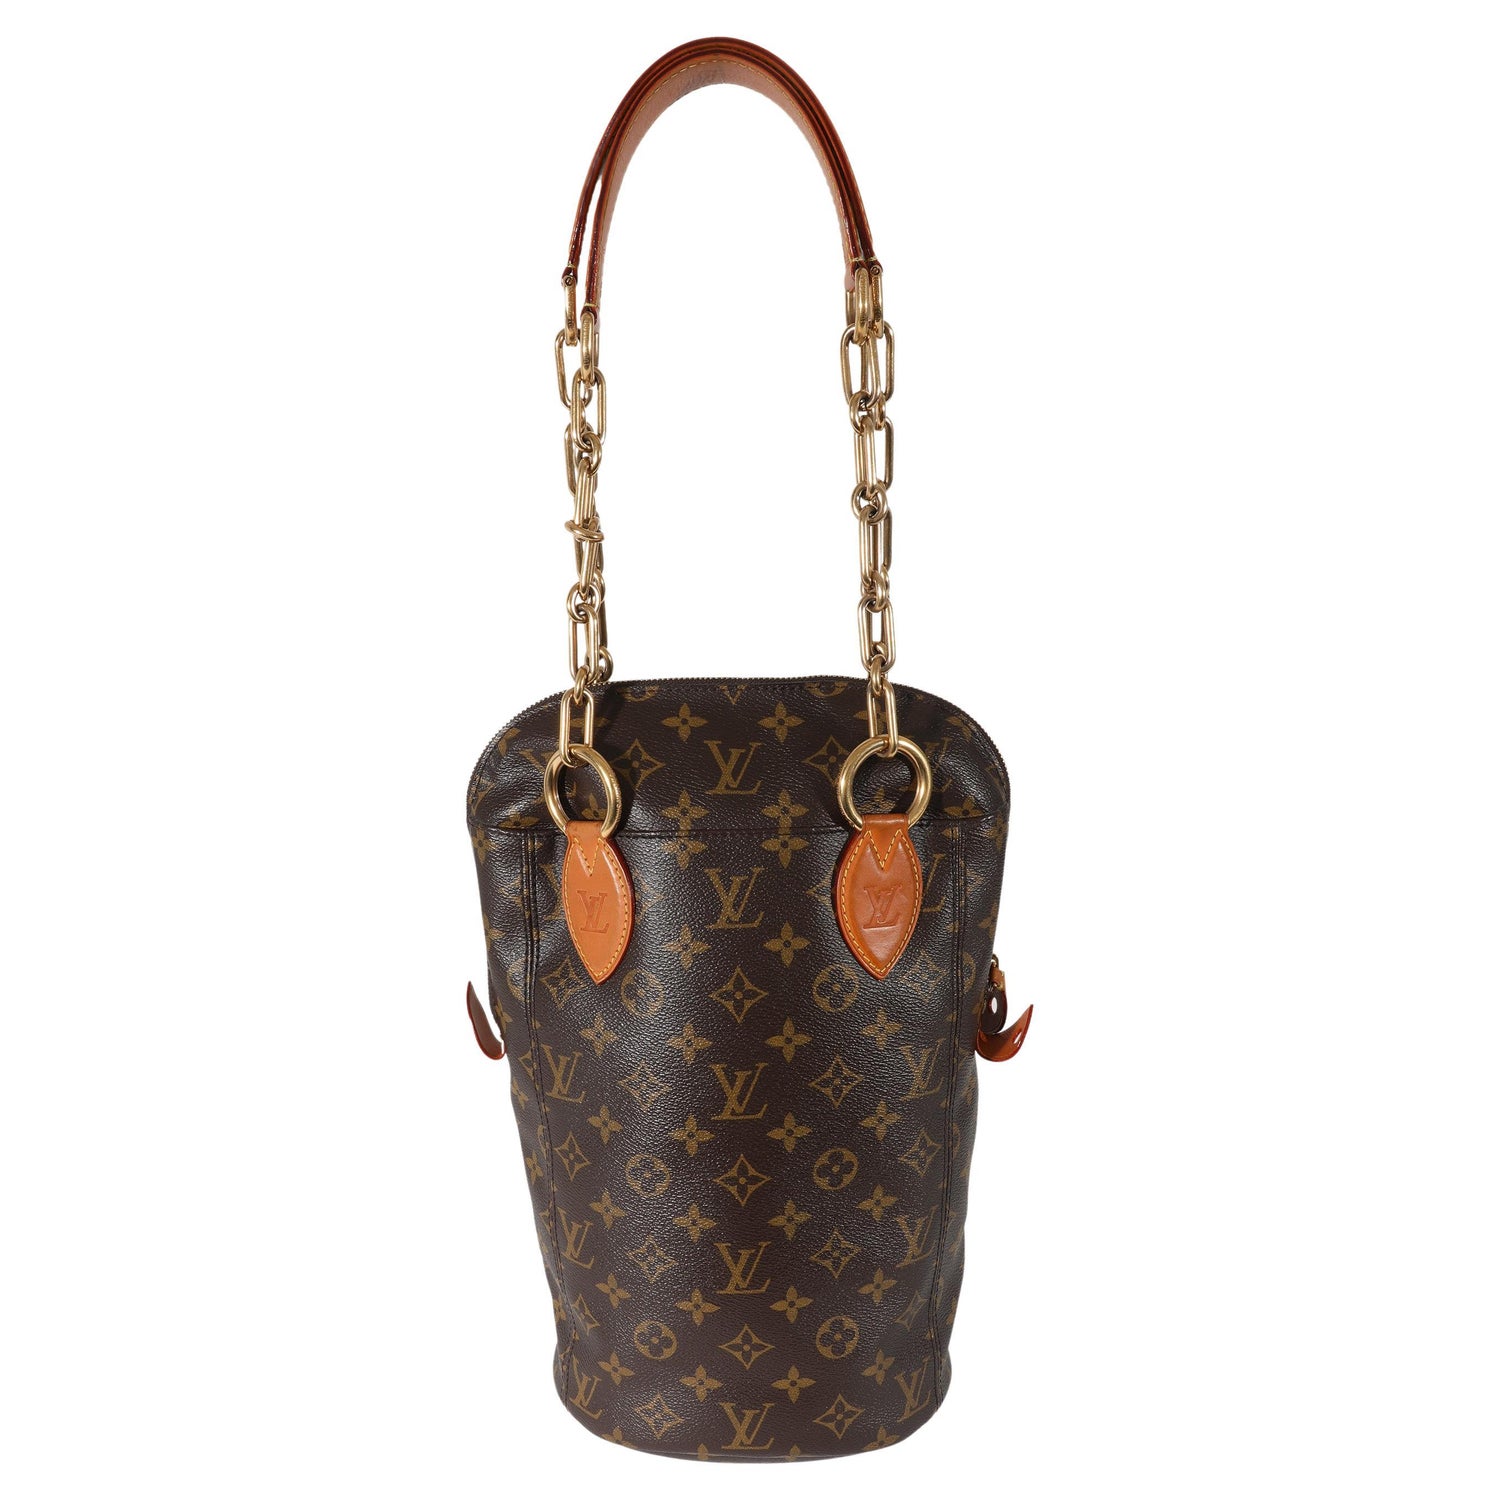 Authentic Louis Vuitton Brown Other Others Bag on sale at JHROP